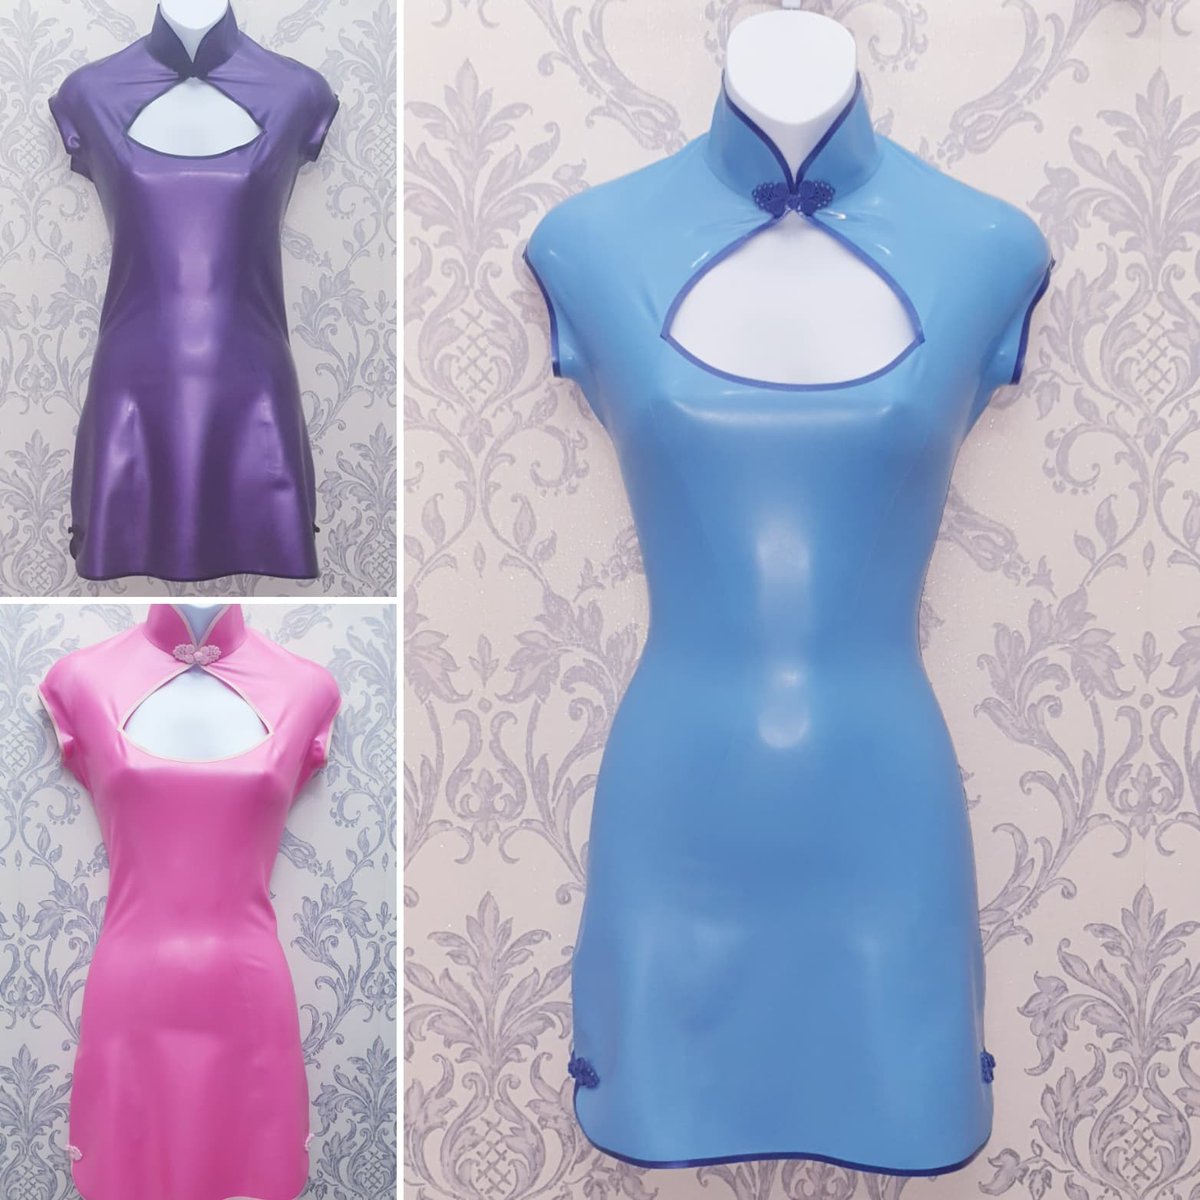 Blossom minidress. In stock in various sizes & colours. Available at Breathless Latex, 48 Phoenix Road, London NW1 1ES Or order online breathless.uk.com #latex #latexfashion #latexshop #Breathlesslatex #rubber #latexdress